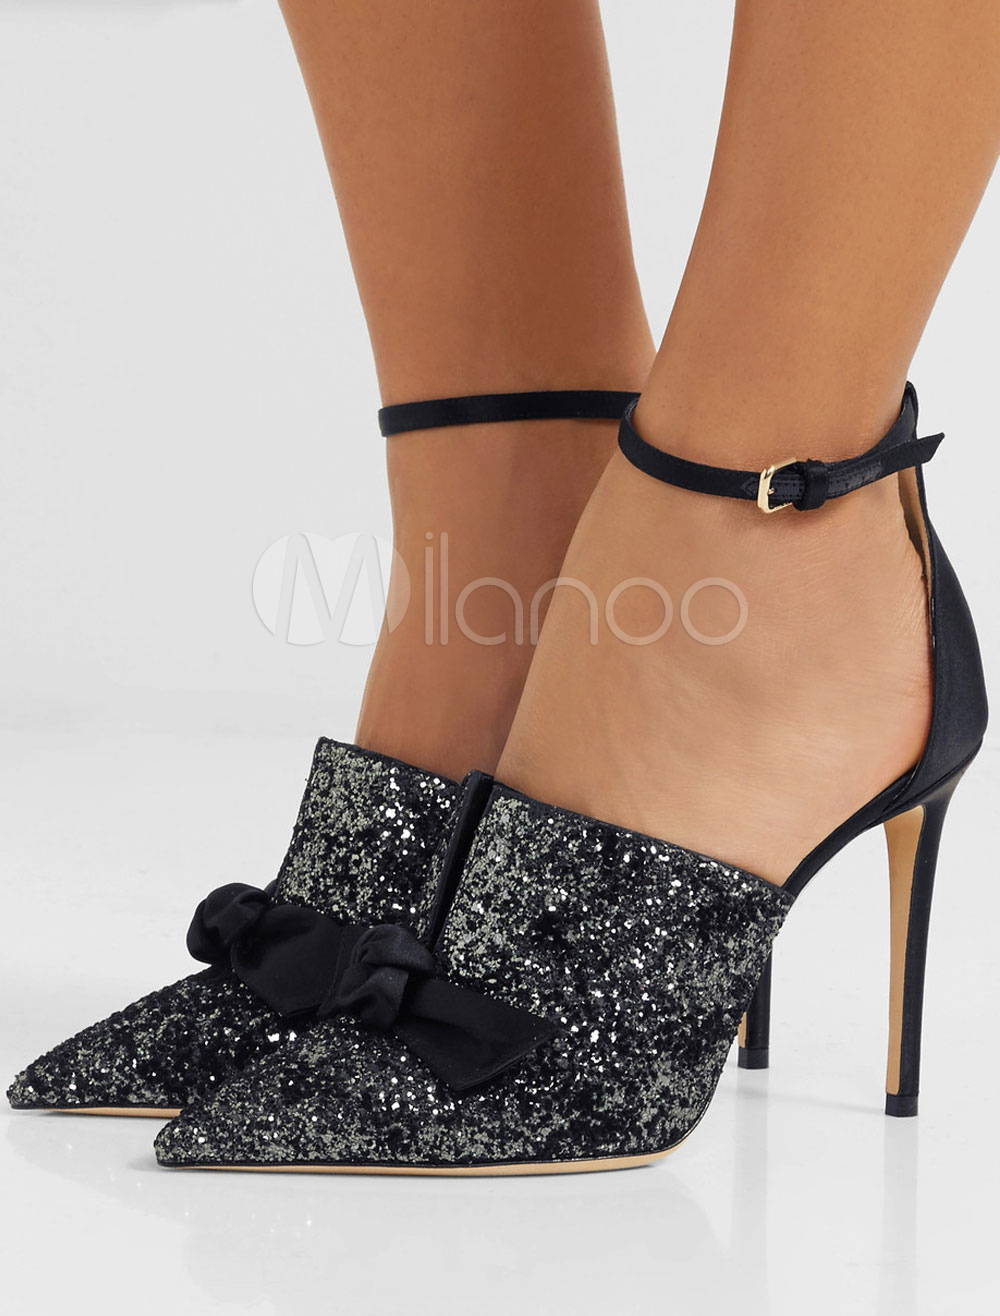 Black Party Shoes Women High Heels 